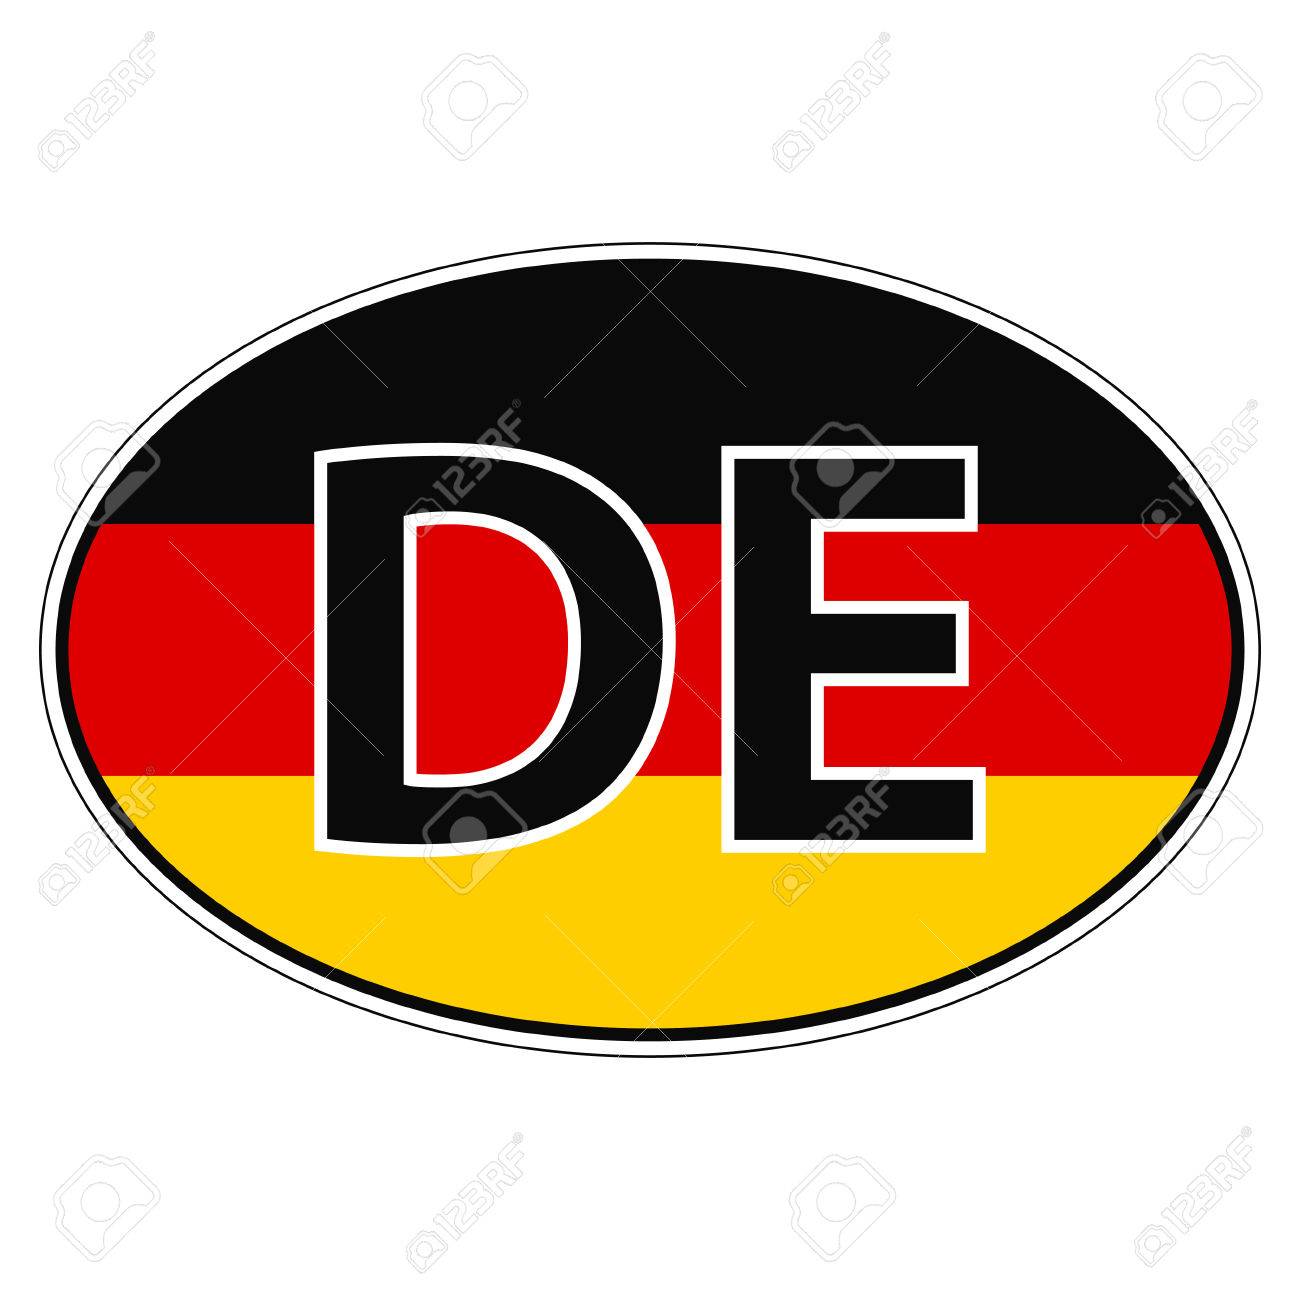 64319481-sticker-on-car-flag-of-germany-germania-deutschland-with-the-inscription-de-vector-for-print-or-webs.jpg